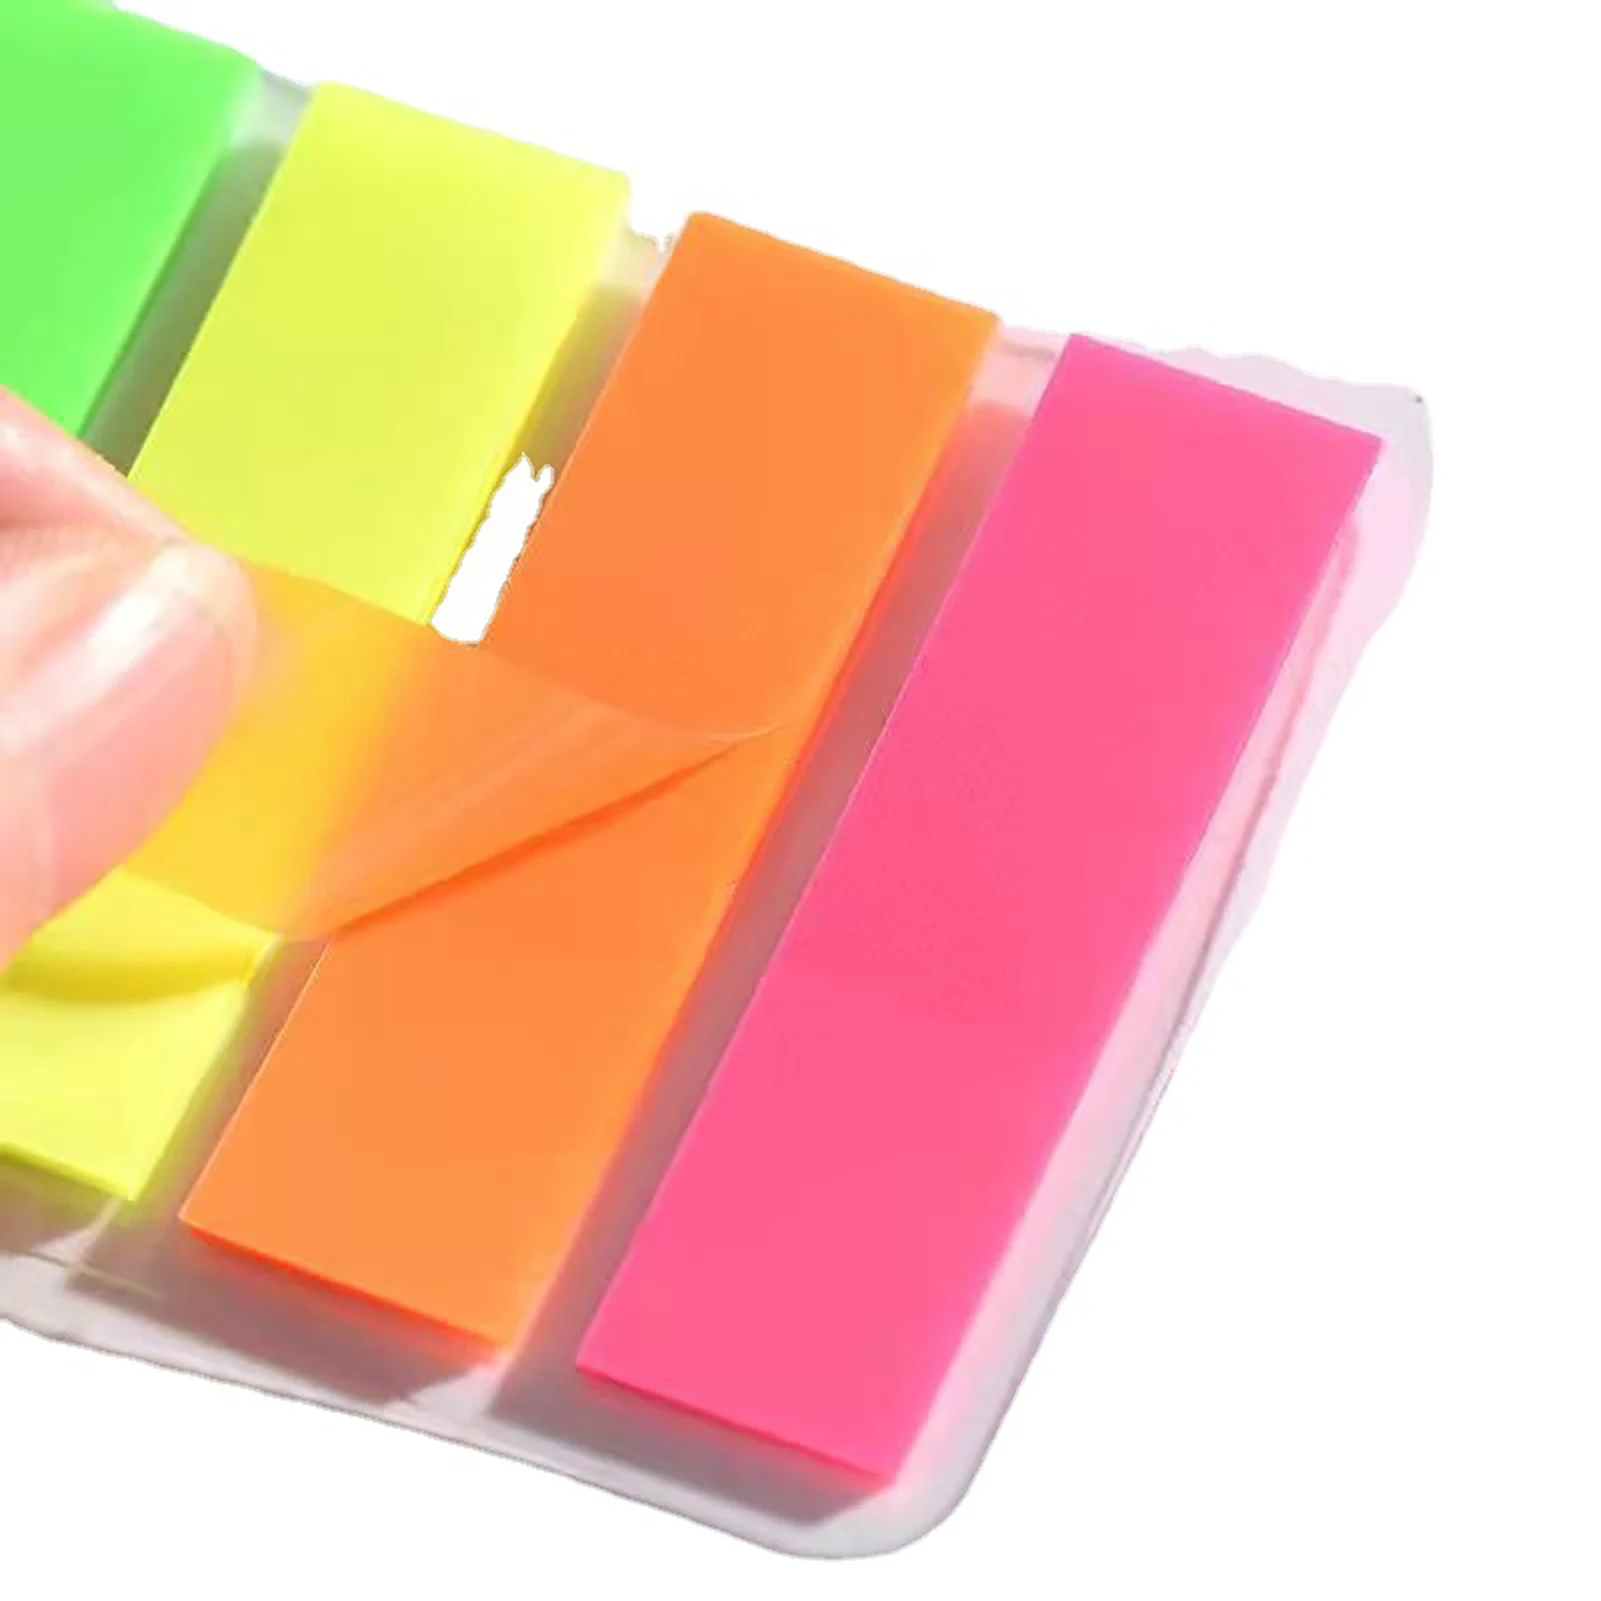 Colored Sticky Classification Markers Translucent Color Clear Practical for Book Reading Highlighting